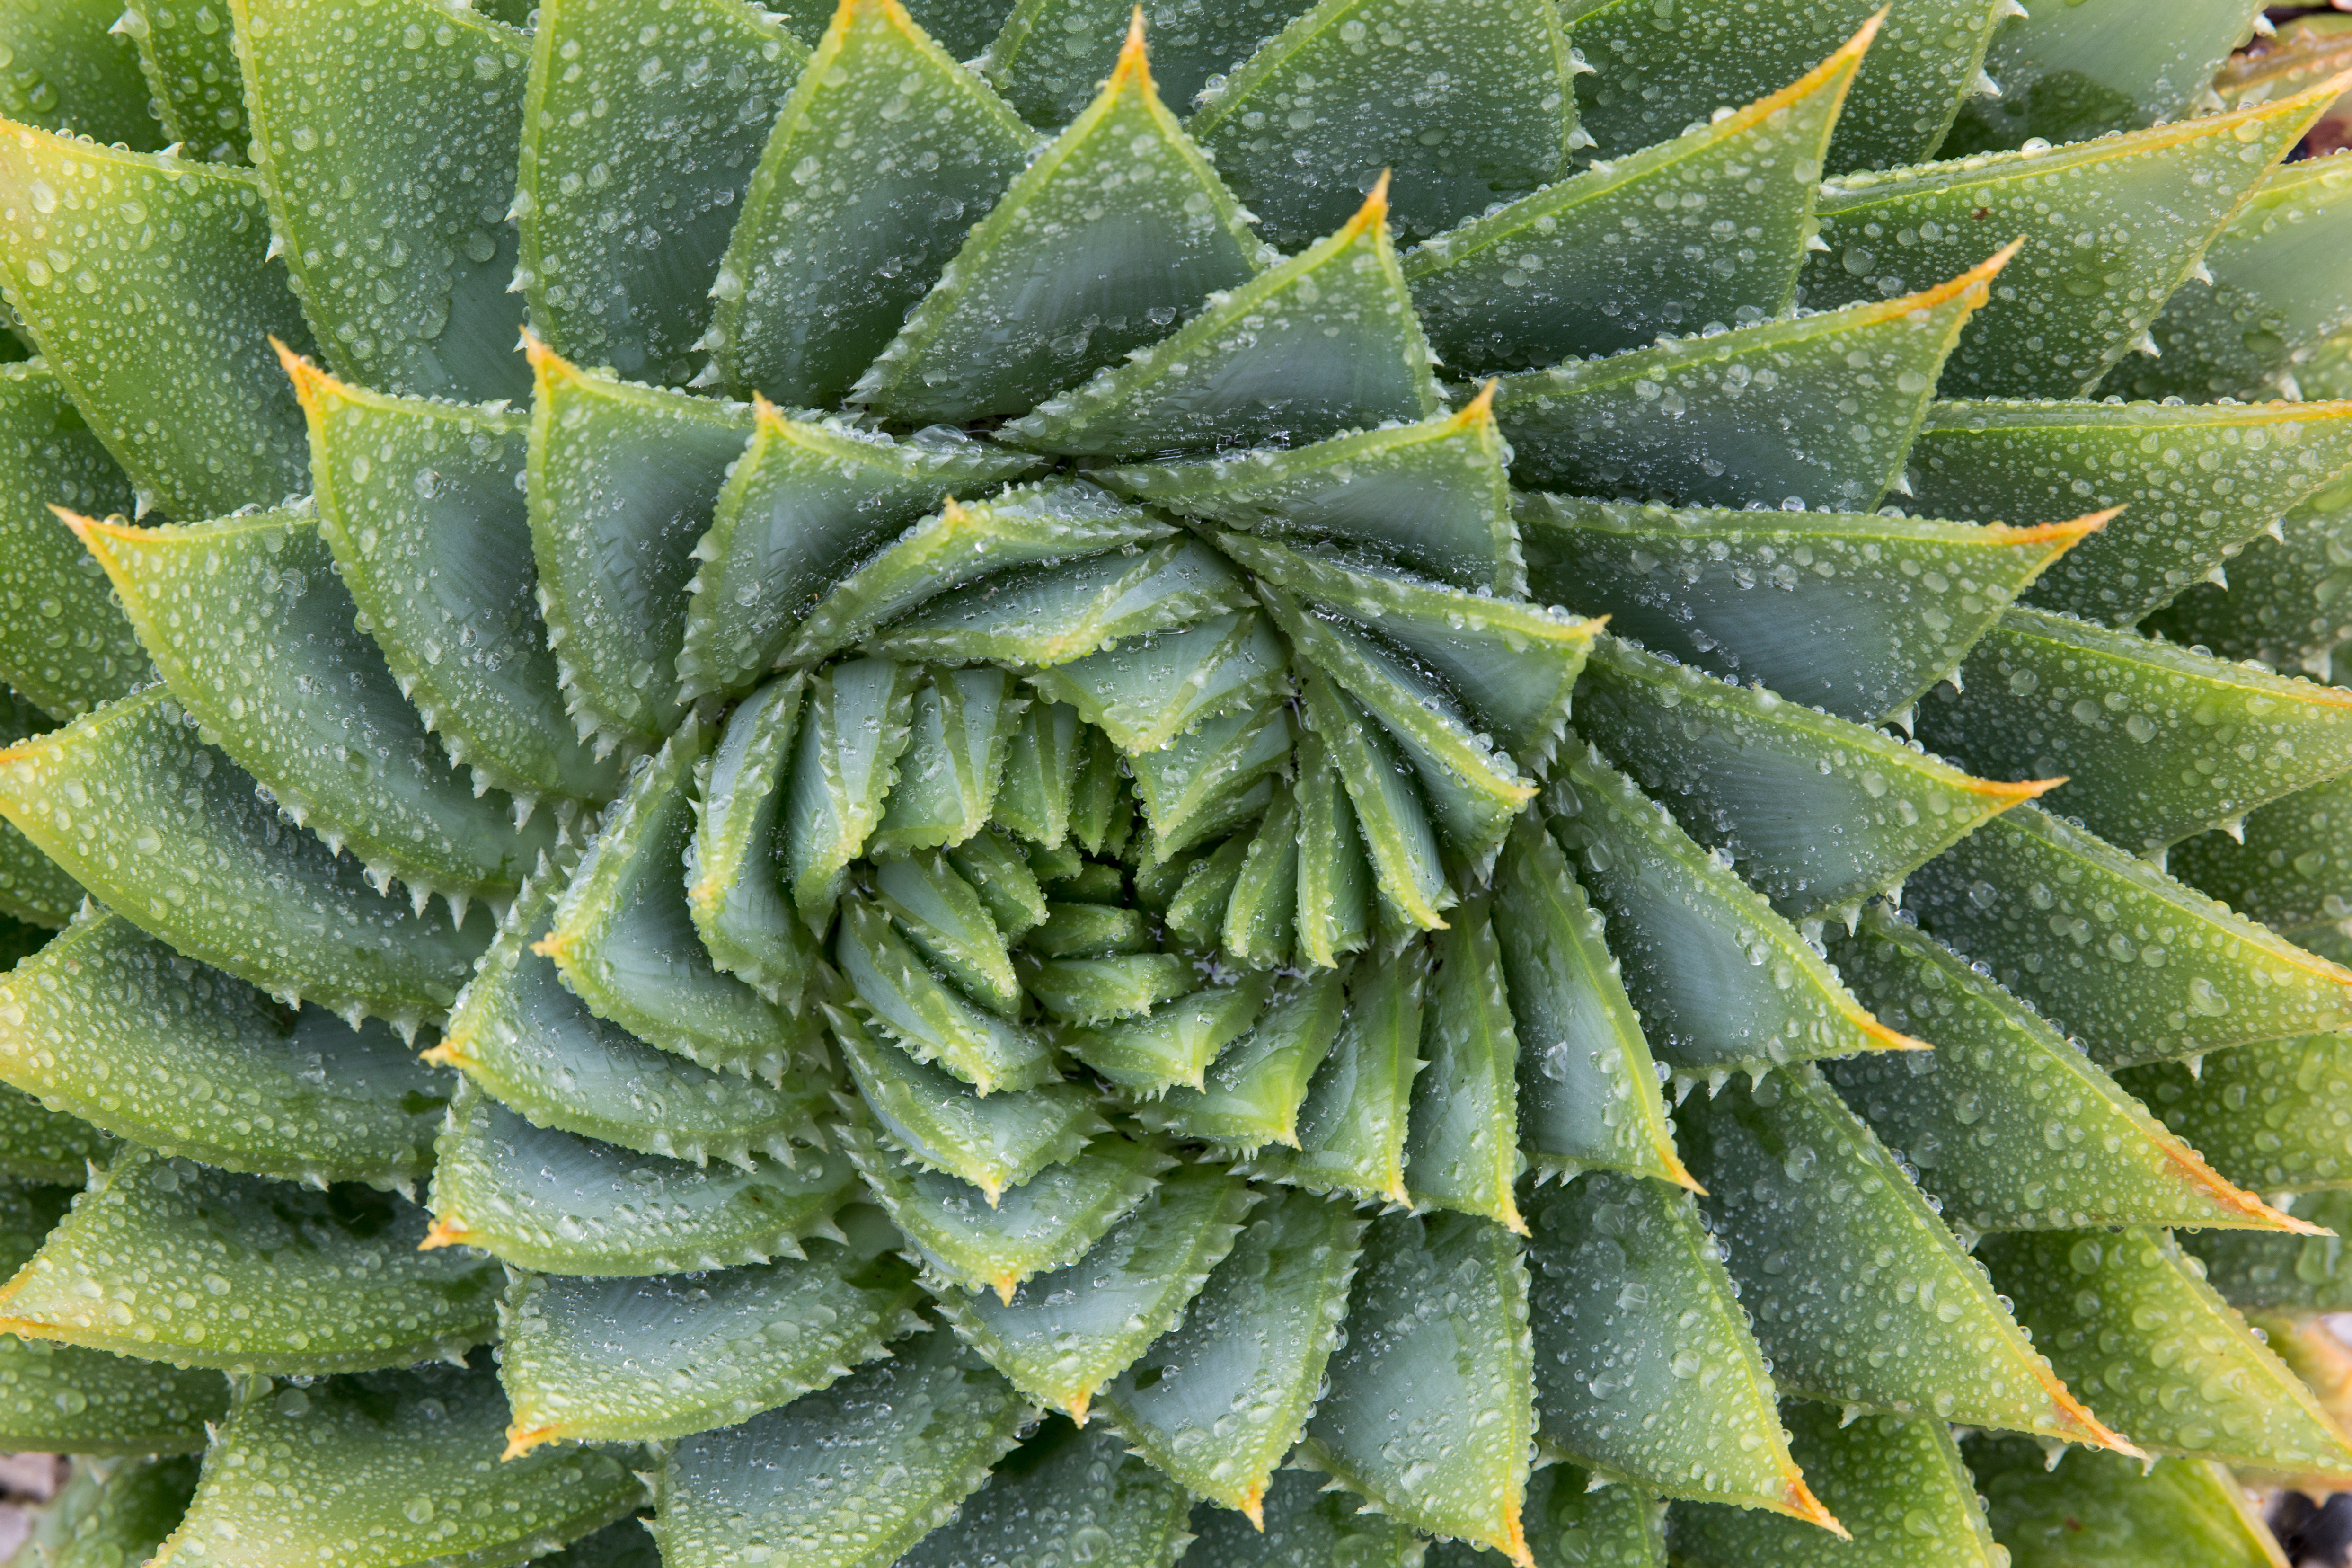 Fractal Patterns in Nature and Art Are Aesthetically Pleasing and